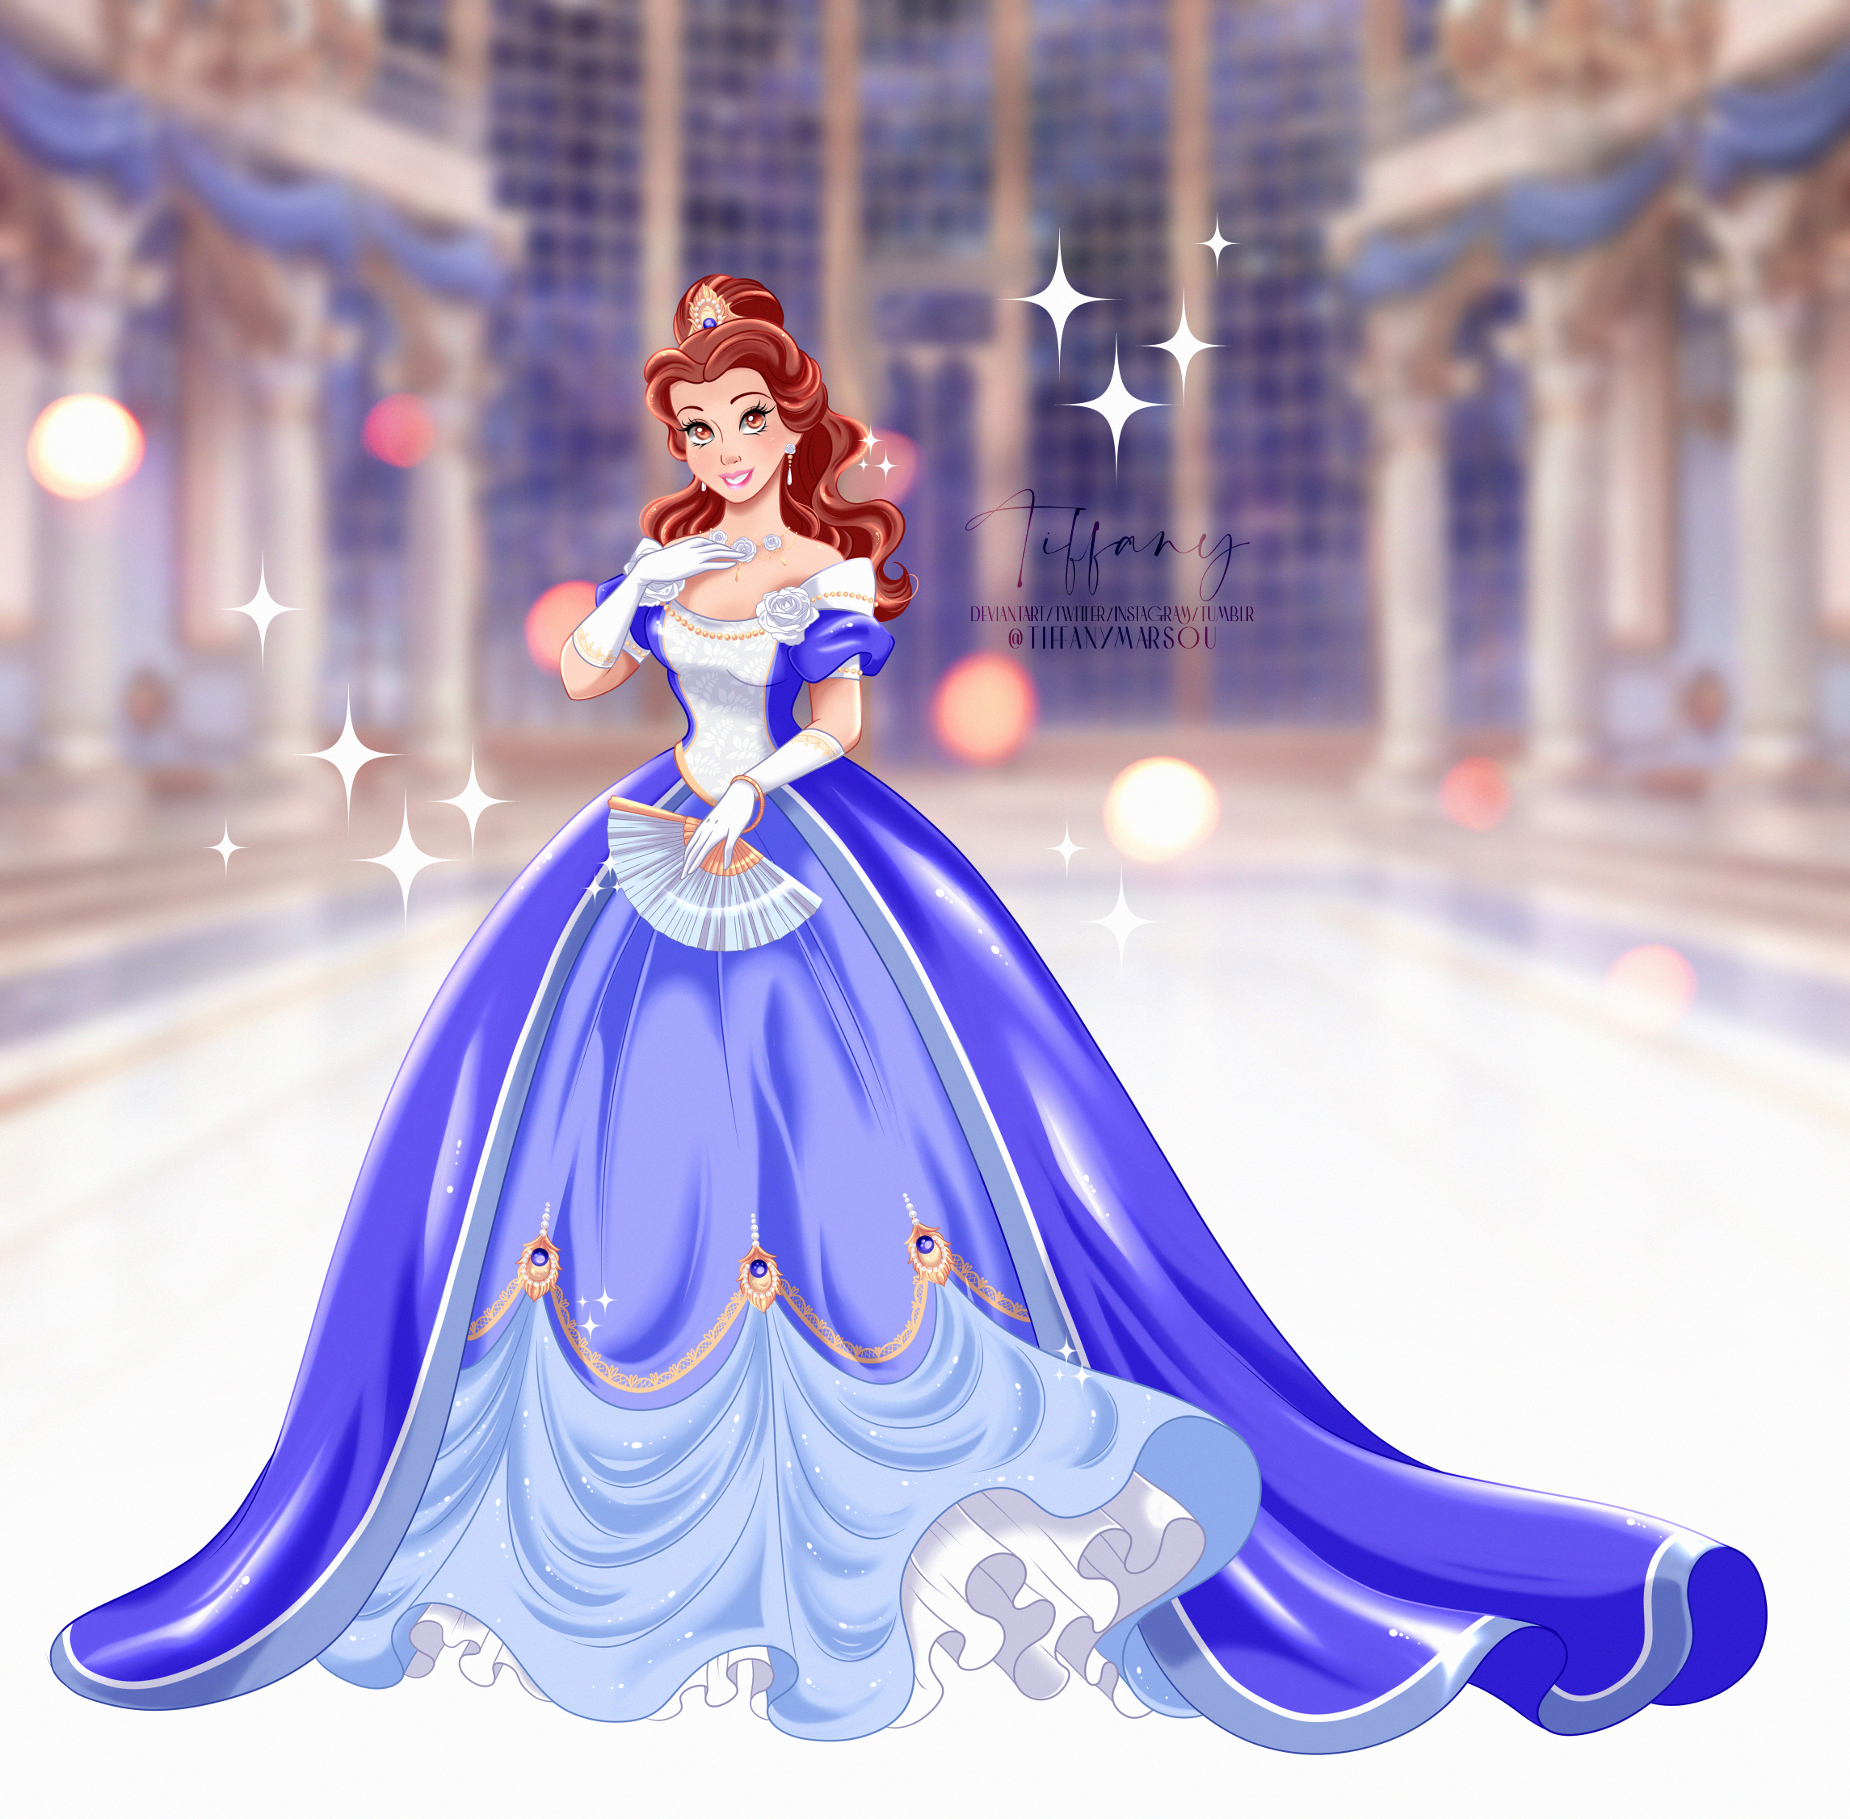 Because nobody 𝑒𝑣𝑒𝑟 suspects the butterfly — My final crystal dress  Belle cosplay! I vectorized